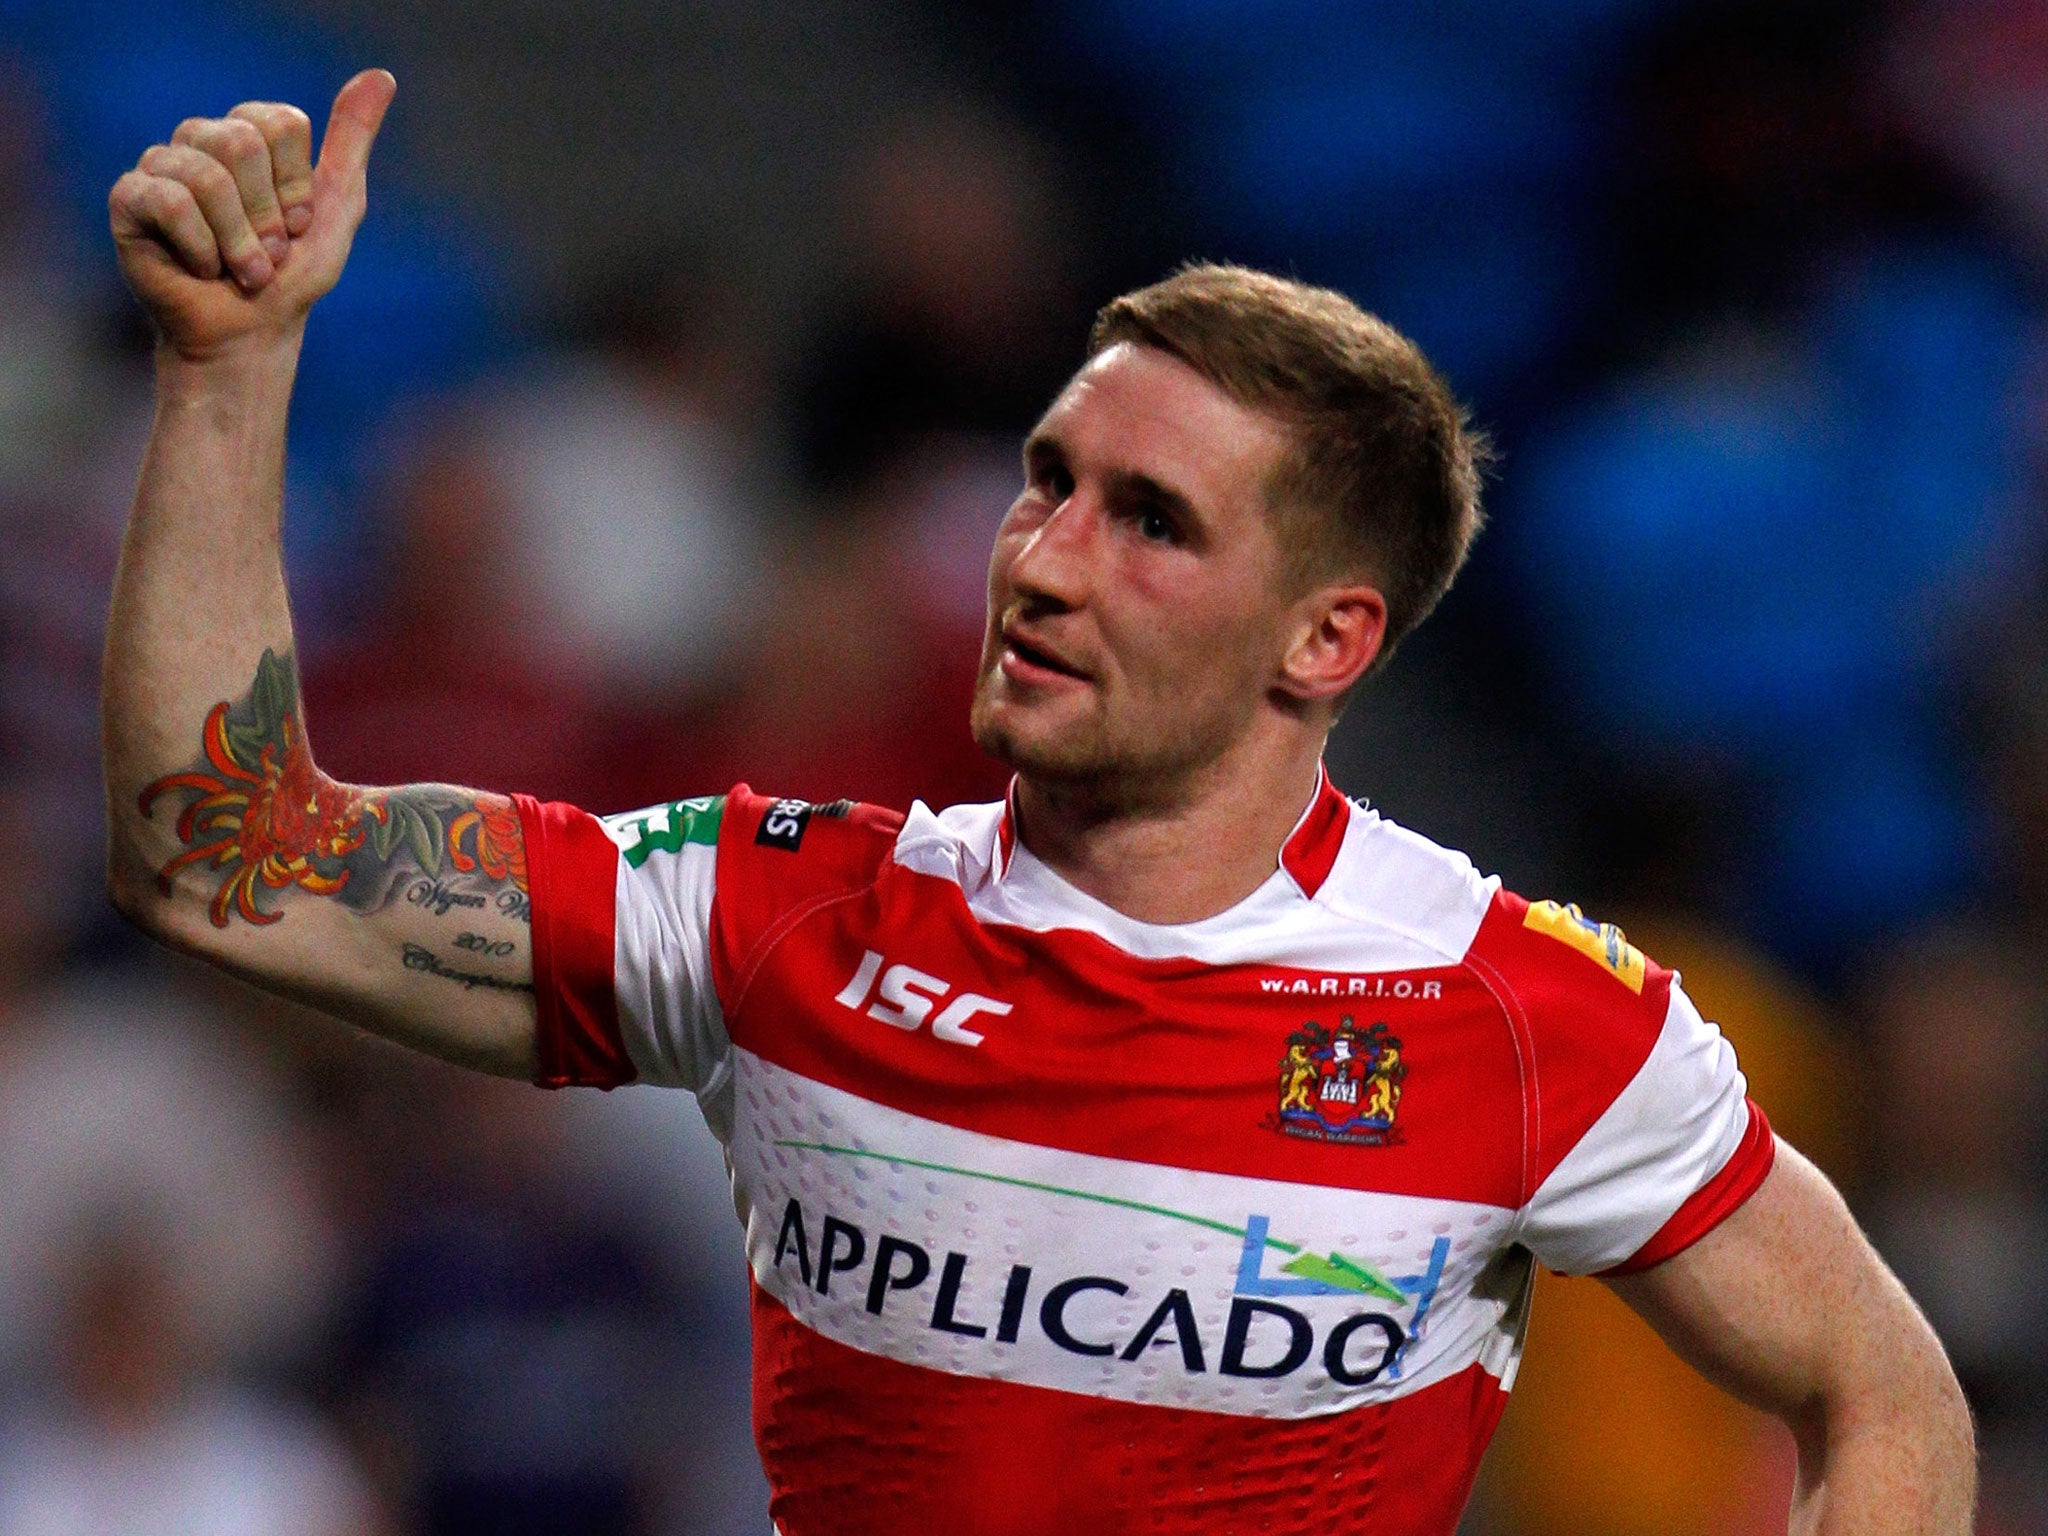 Sam Tomkins: The Wigan player scored the opening try for the league leaders